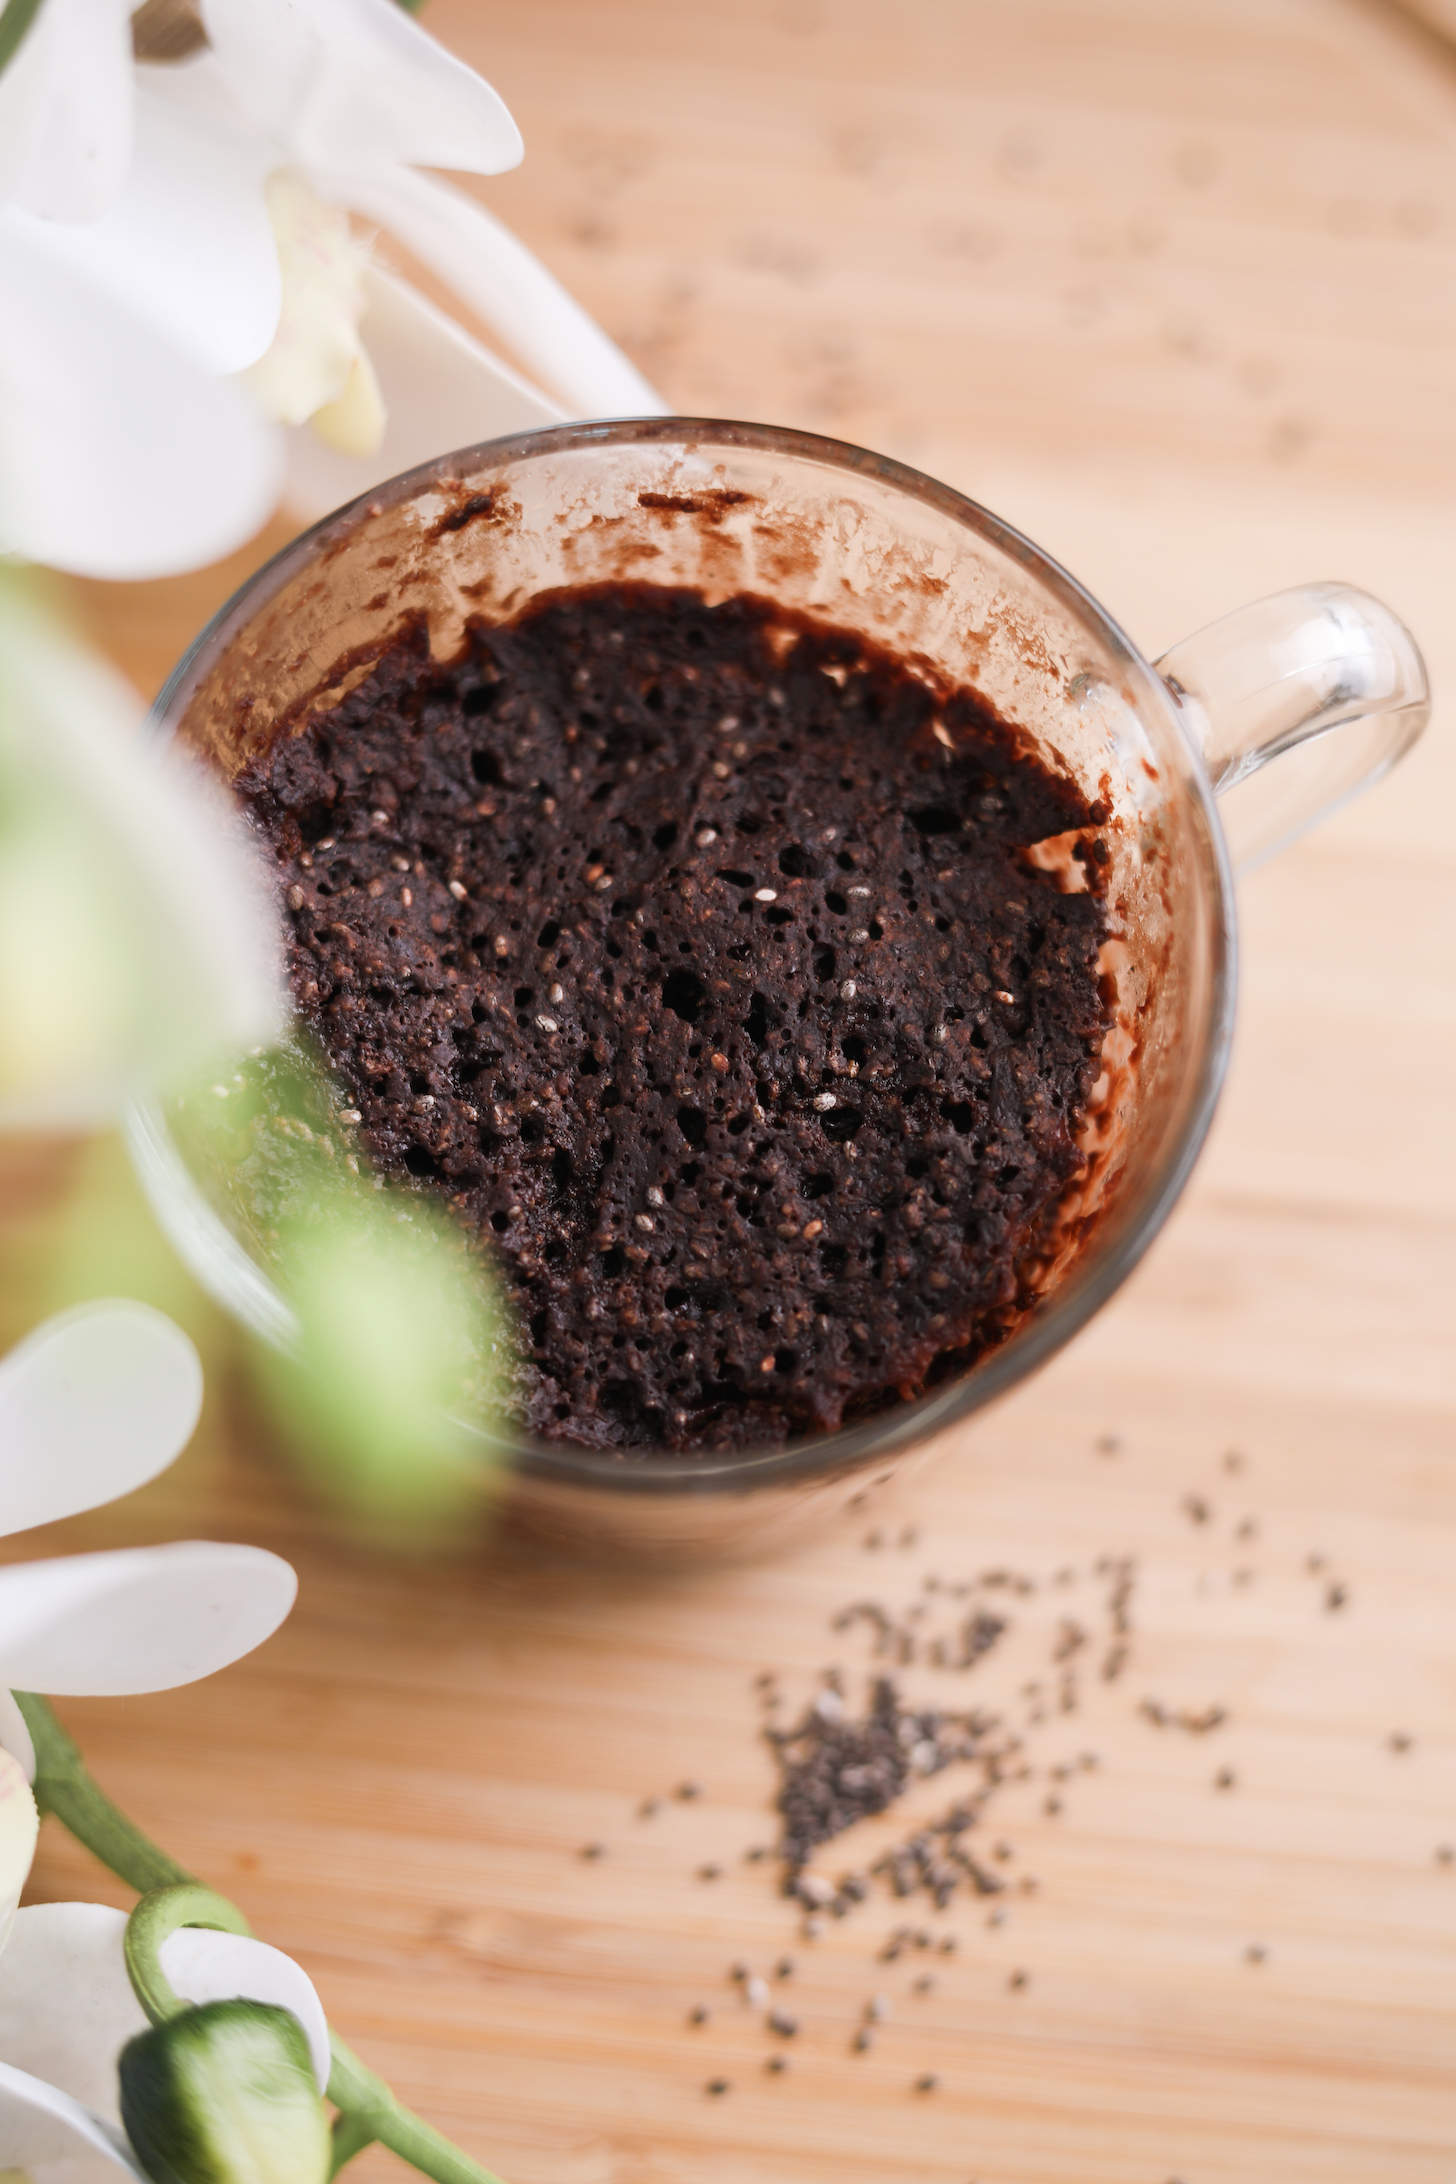 A mug containing chocolate cake with white flowers in the foreground.